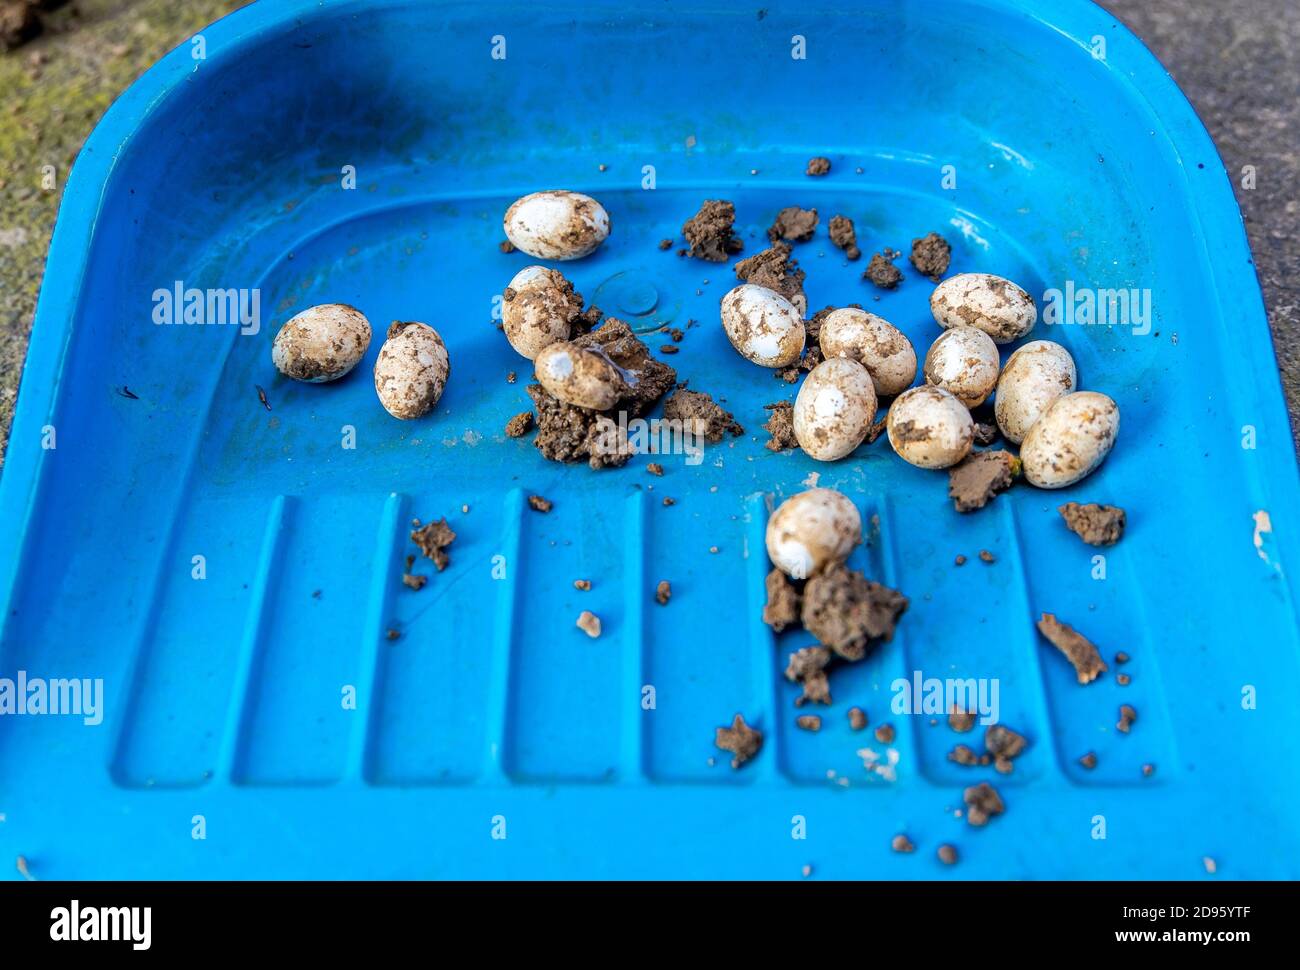 Closeup of Common Watersnake Eggs collected on a plastic dust collector from the garden soil. Stock Photo